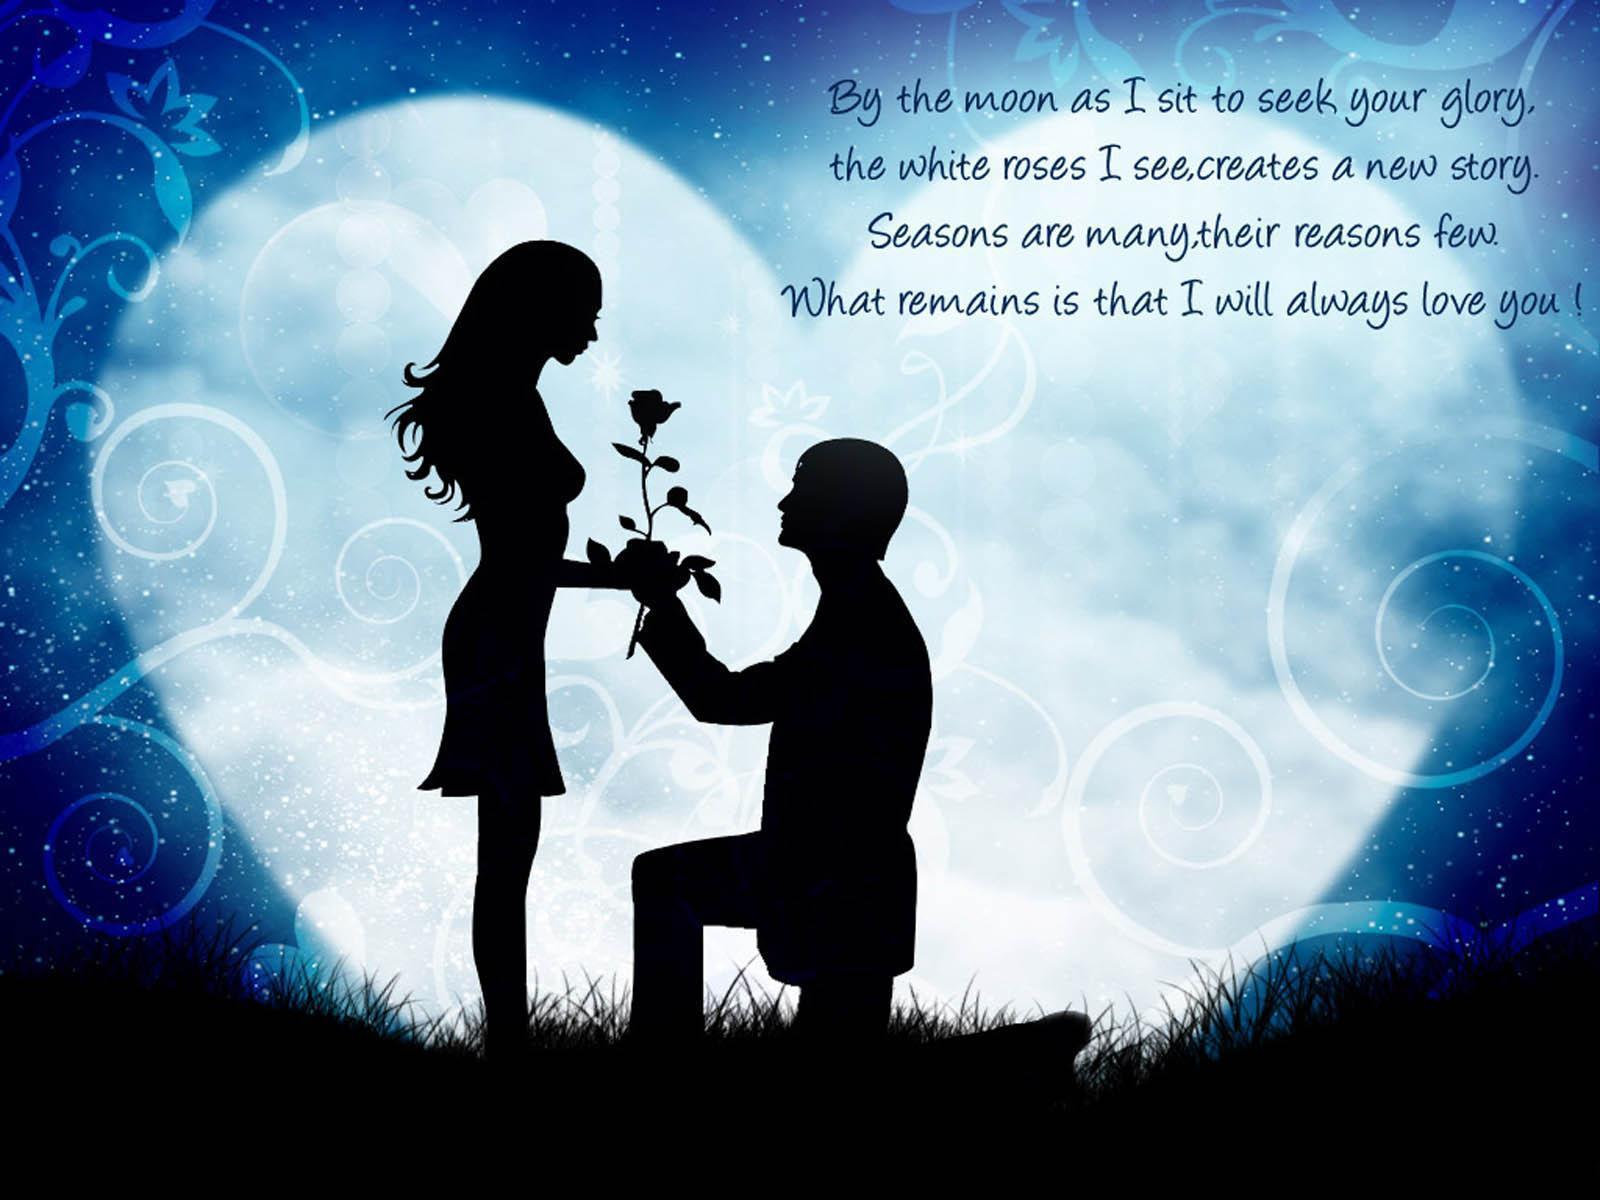 Cute Love Quote Photo for Someone Special. The Recruitment